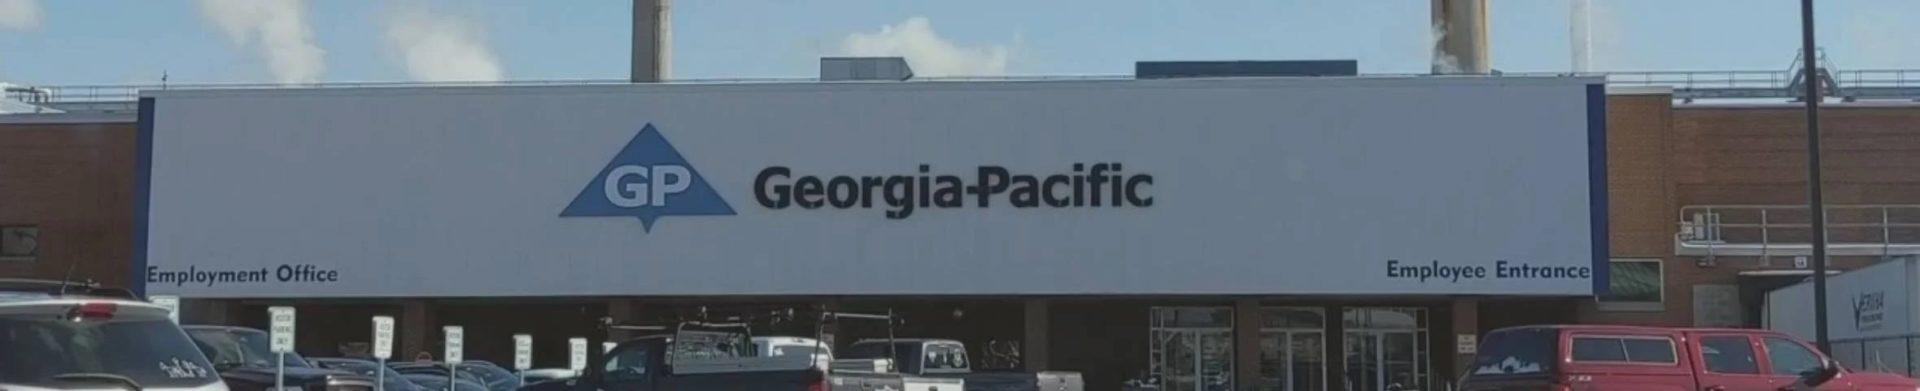 Georgia-Pacific office branch in the daytime